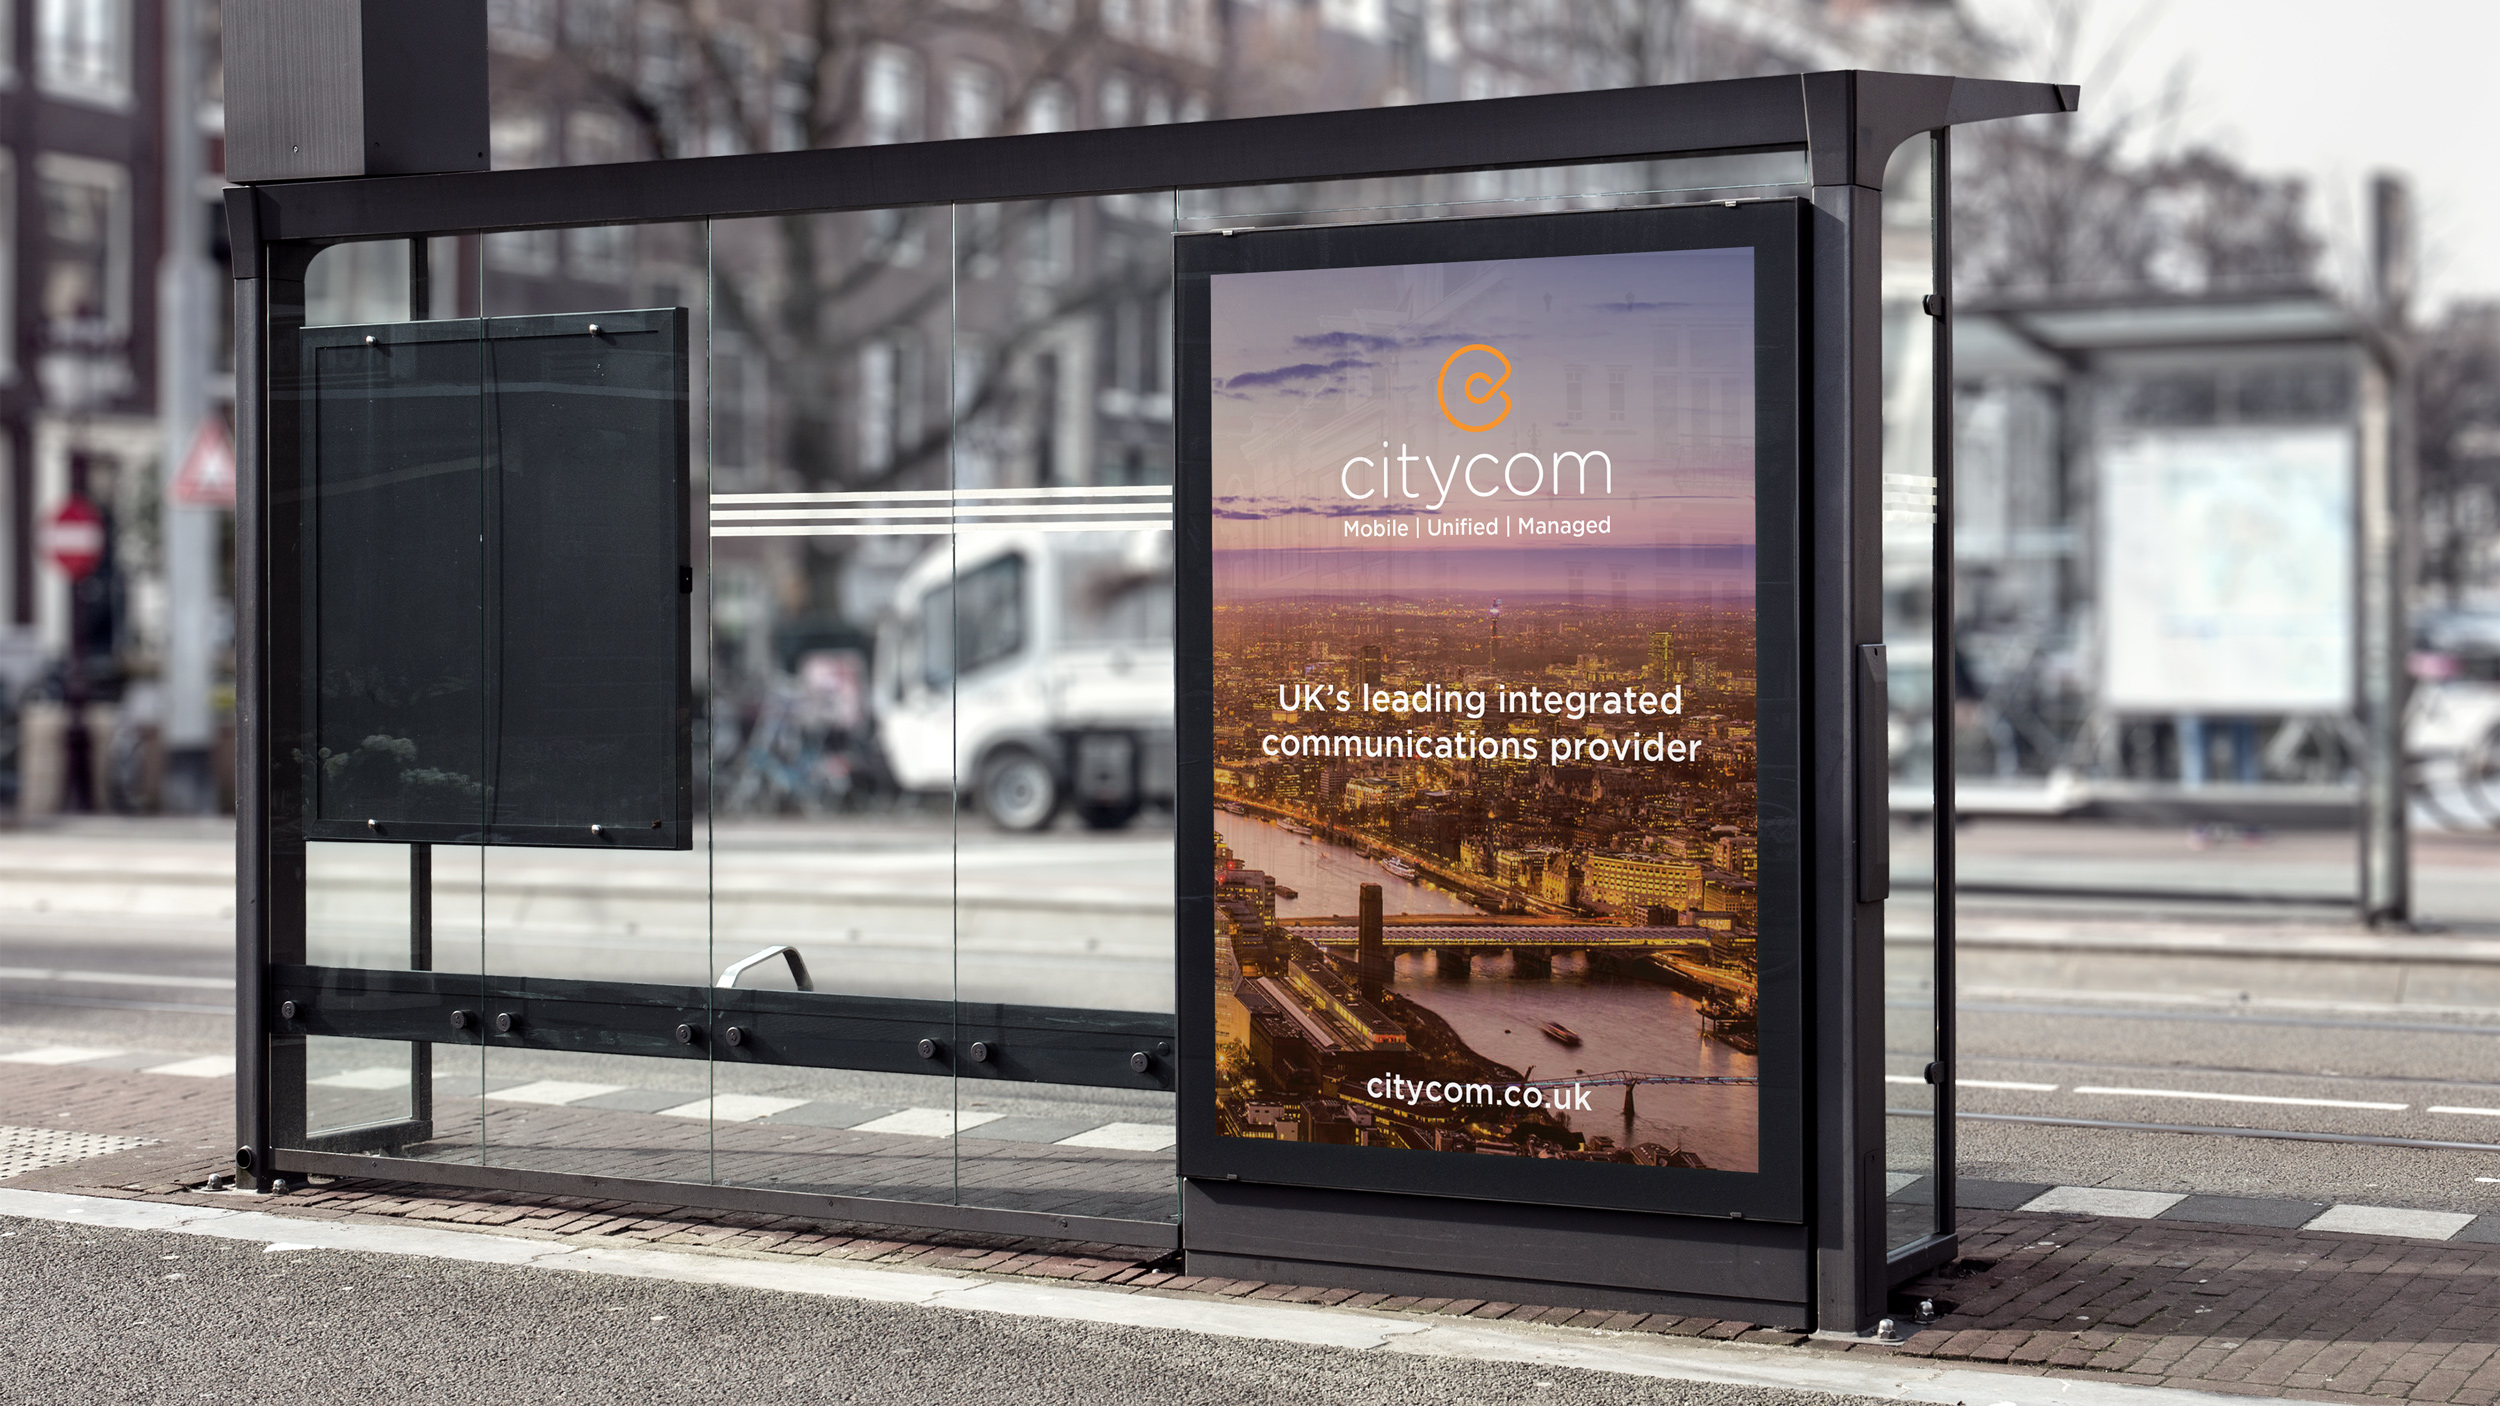 Citycom advert in situ on the side of a tram stop